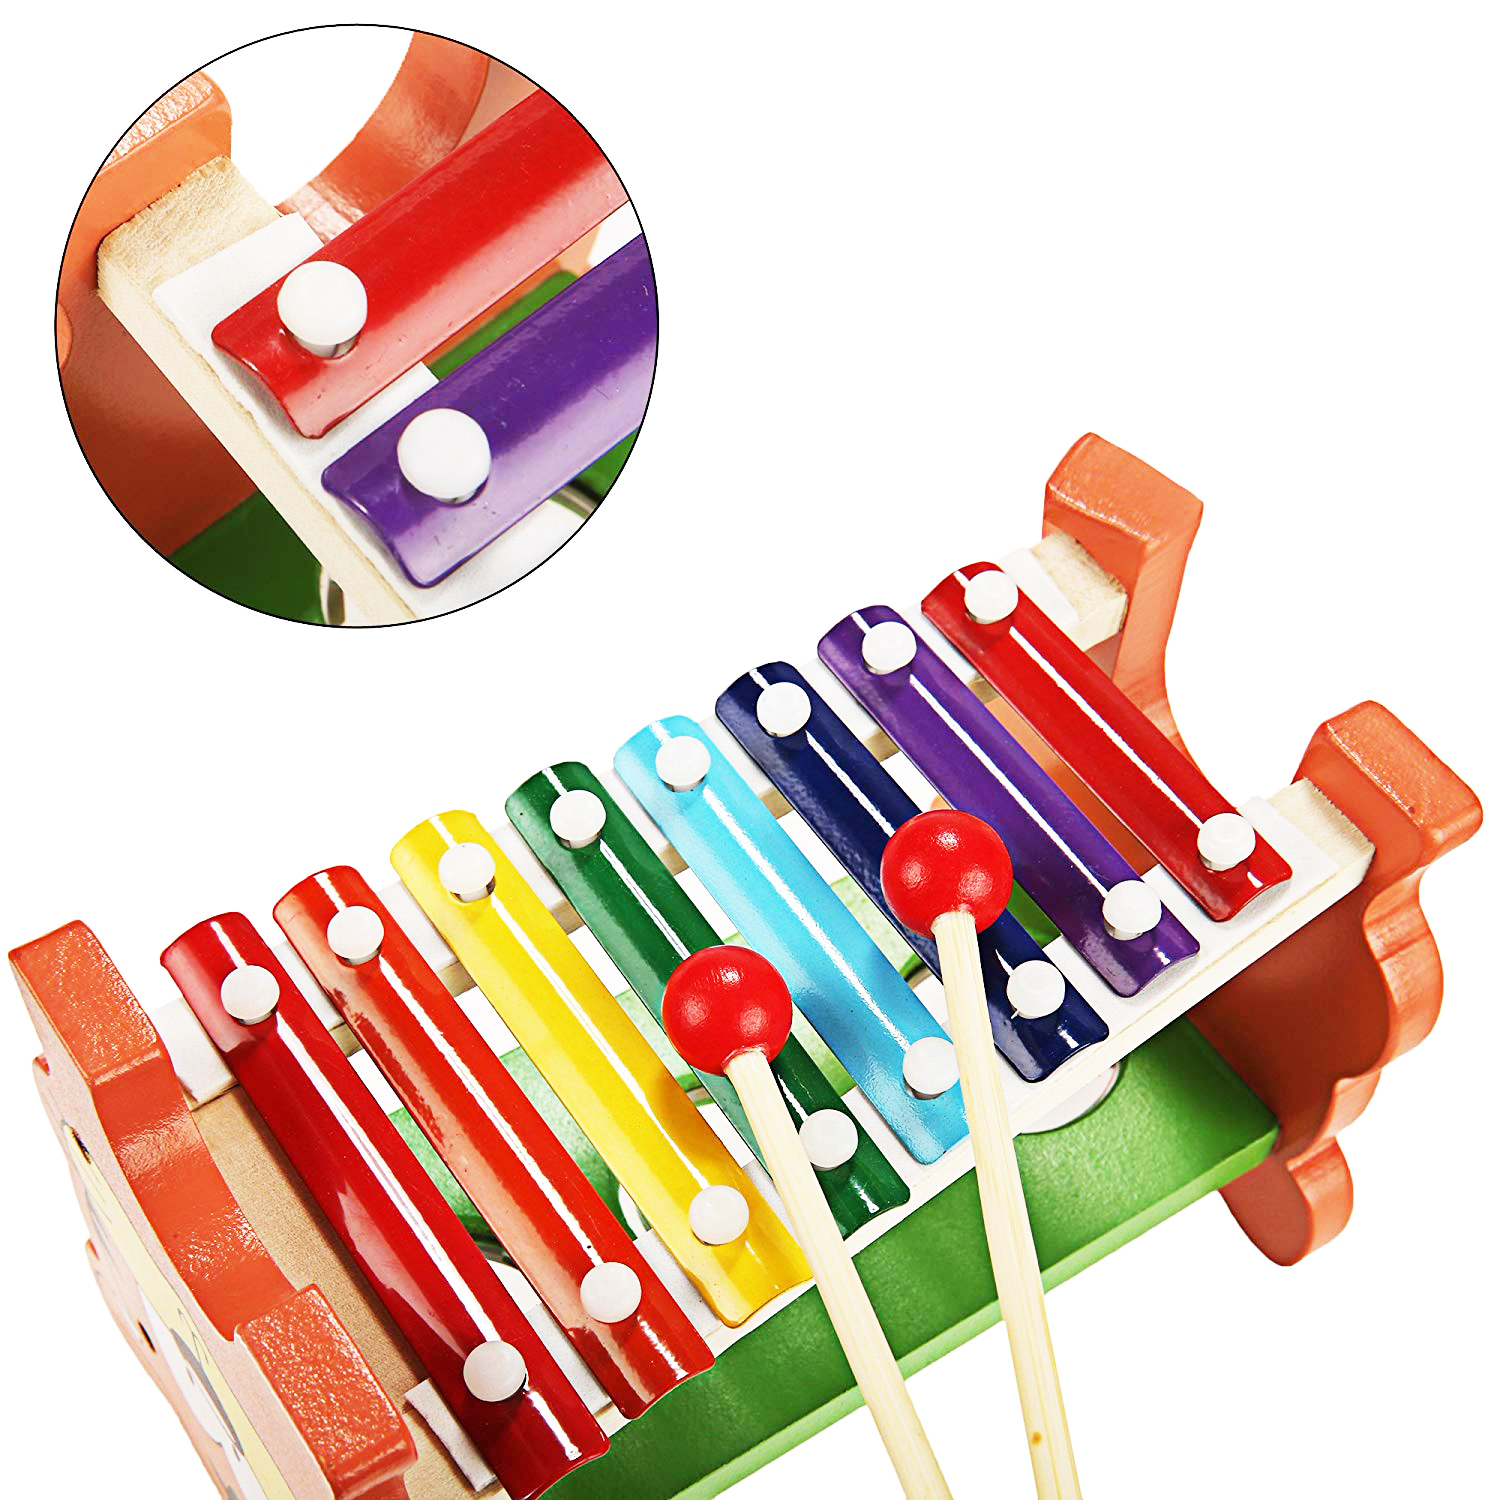 2-In-1-Wooden-Tap-Xylophone-Education-Musical-Instruments-for-Children-1414121